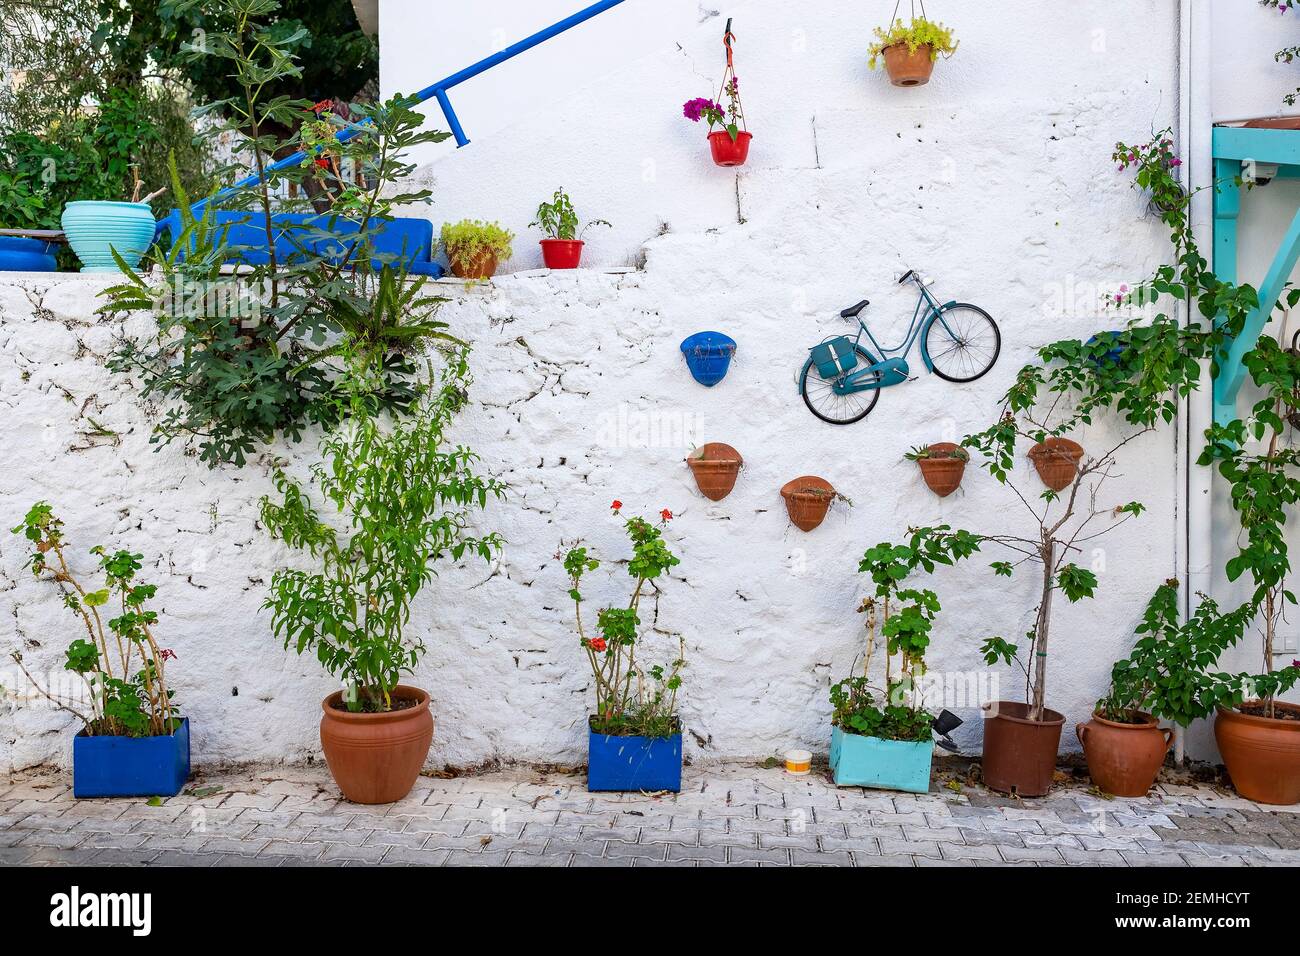 Decorated white wall with plants and bicycle, Kas, Turkey Stock Photo